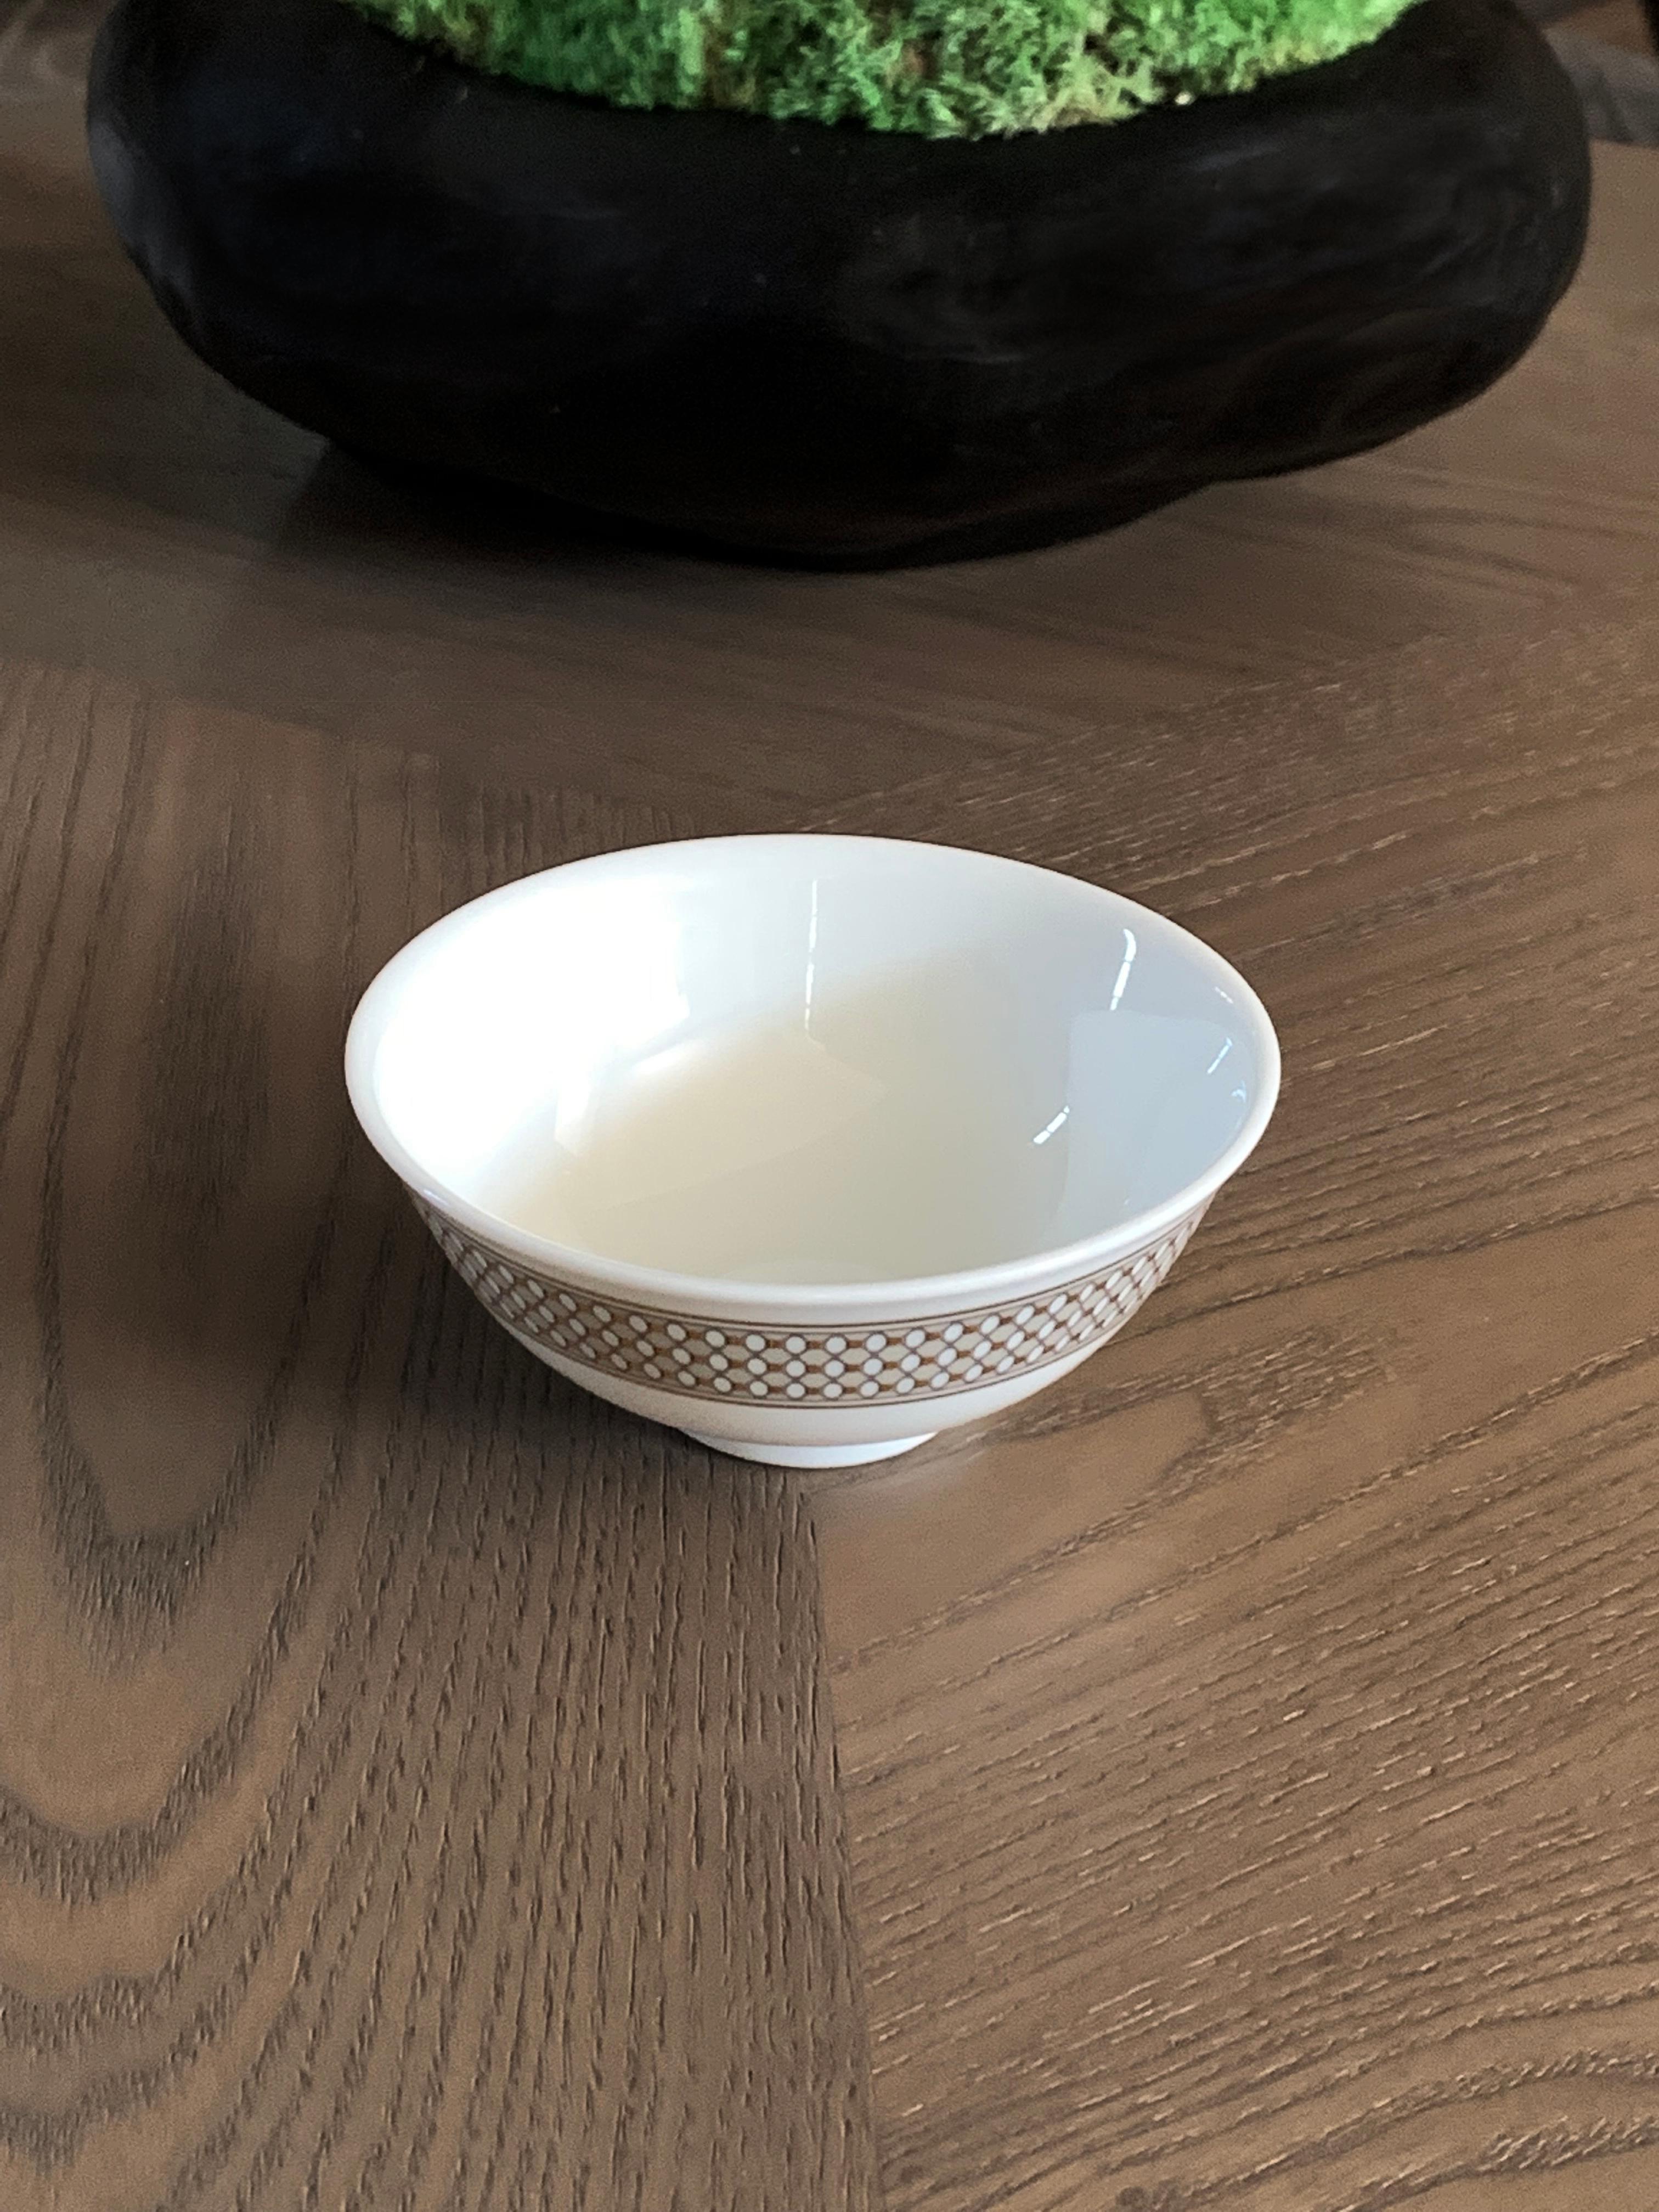 Larger quantities available upon request, with 8 weeks production time.

Description: Chinese rice bowl (2 pieces)
Color: Beige and gold
Size: 12 Ø x 5.5 H cm, 250 ml
Material: Porcelain and gold
Collection: Modern vintage.